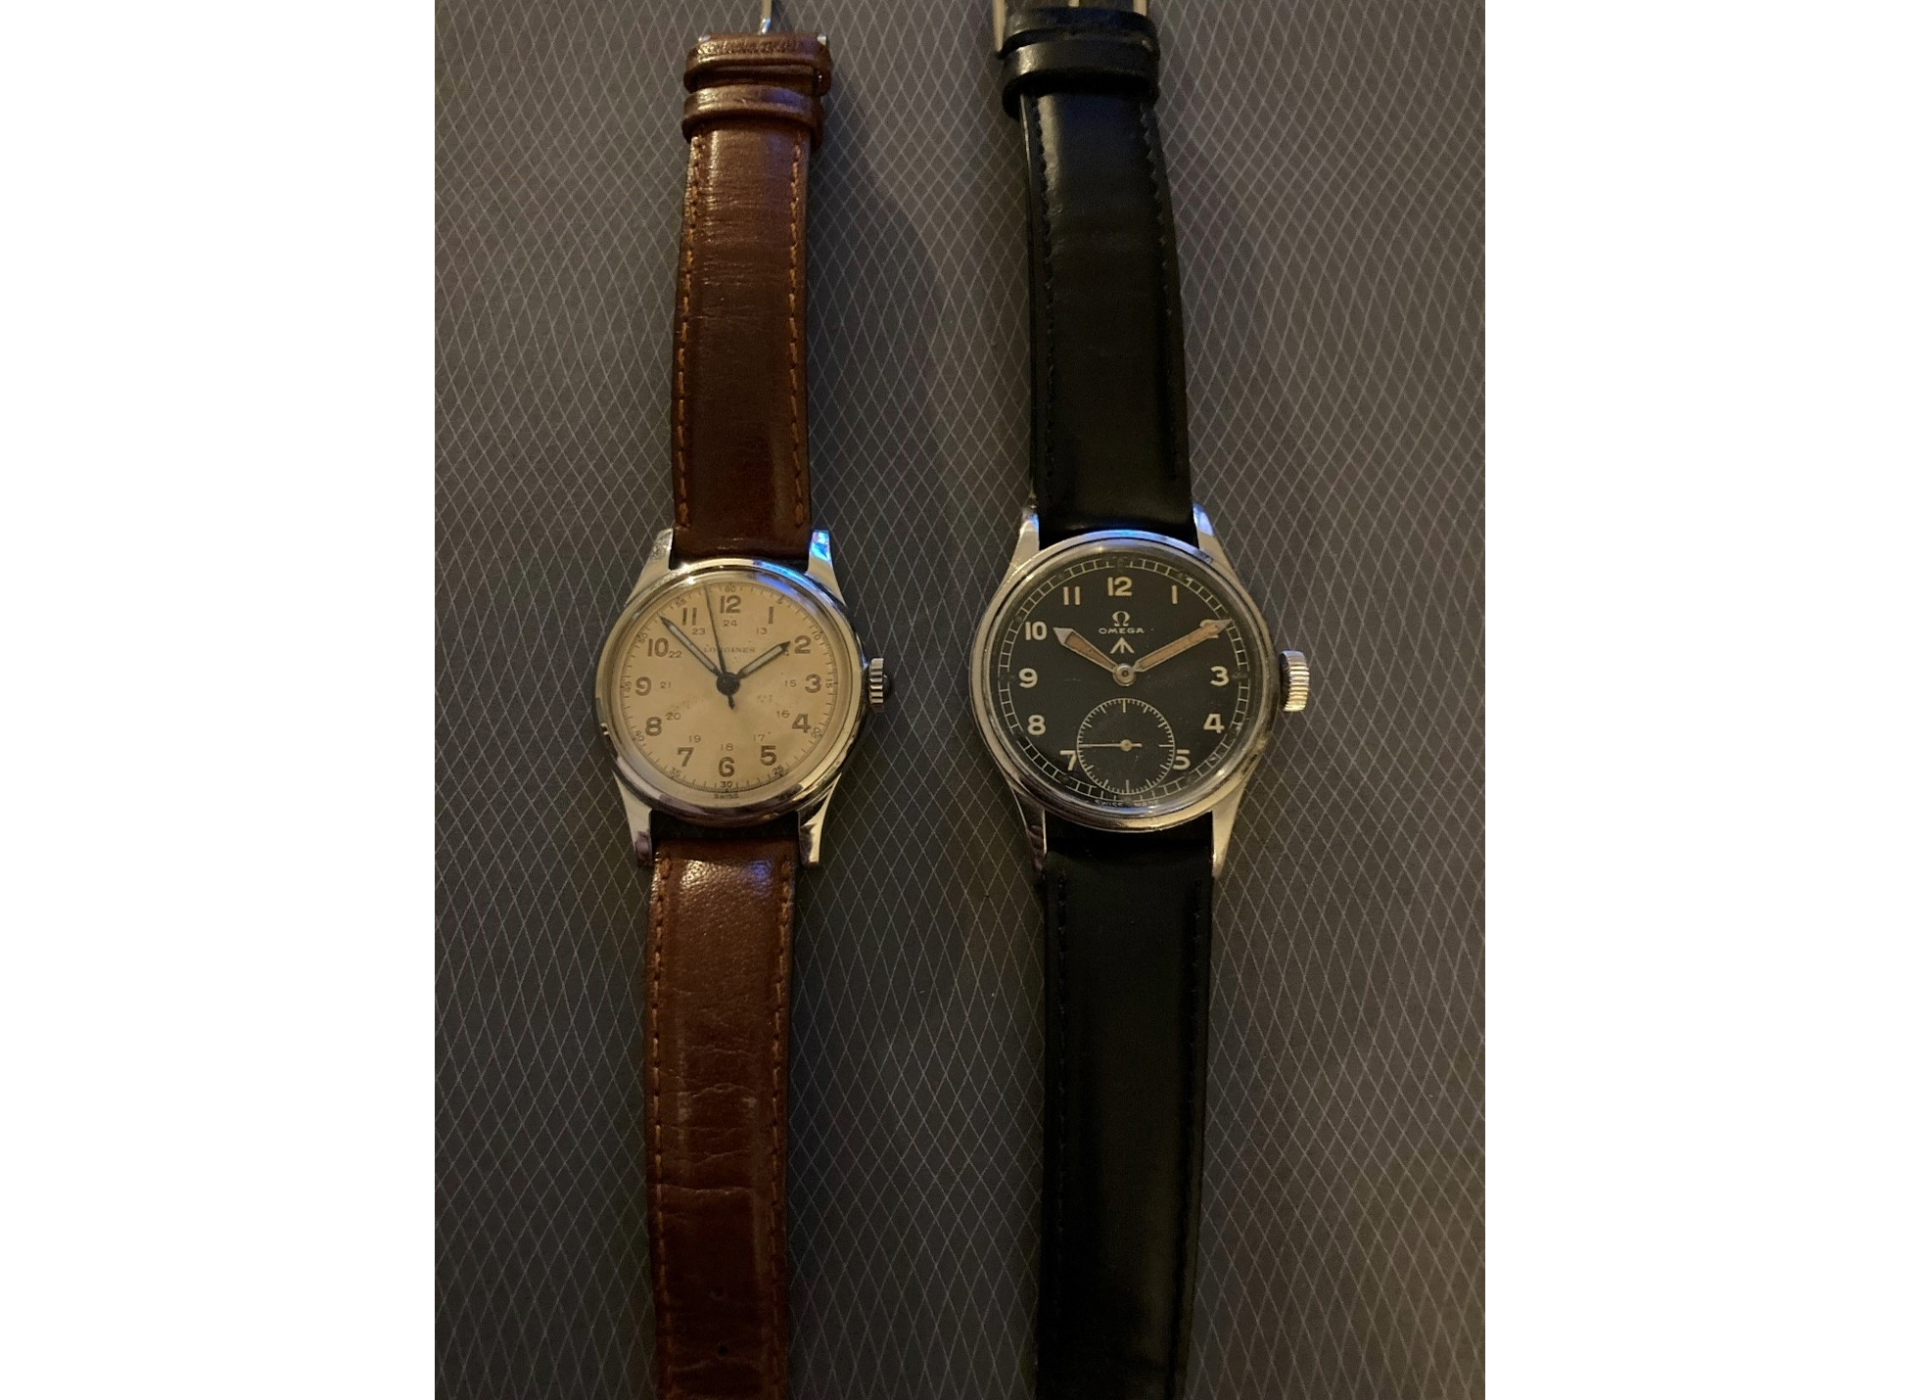 A 1945 Longines US Navy issue, left, and a 1945 Omega WWW watch